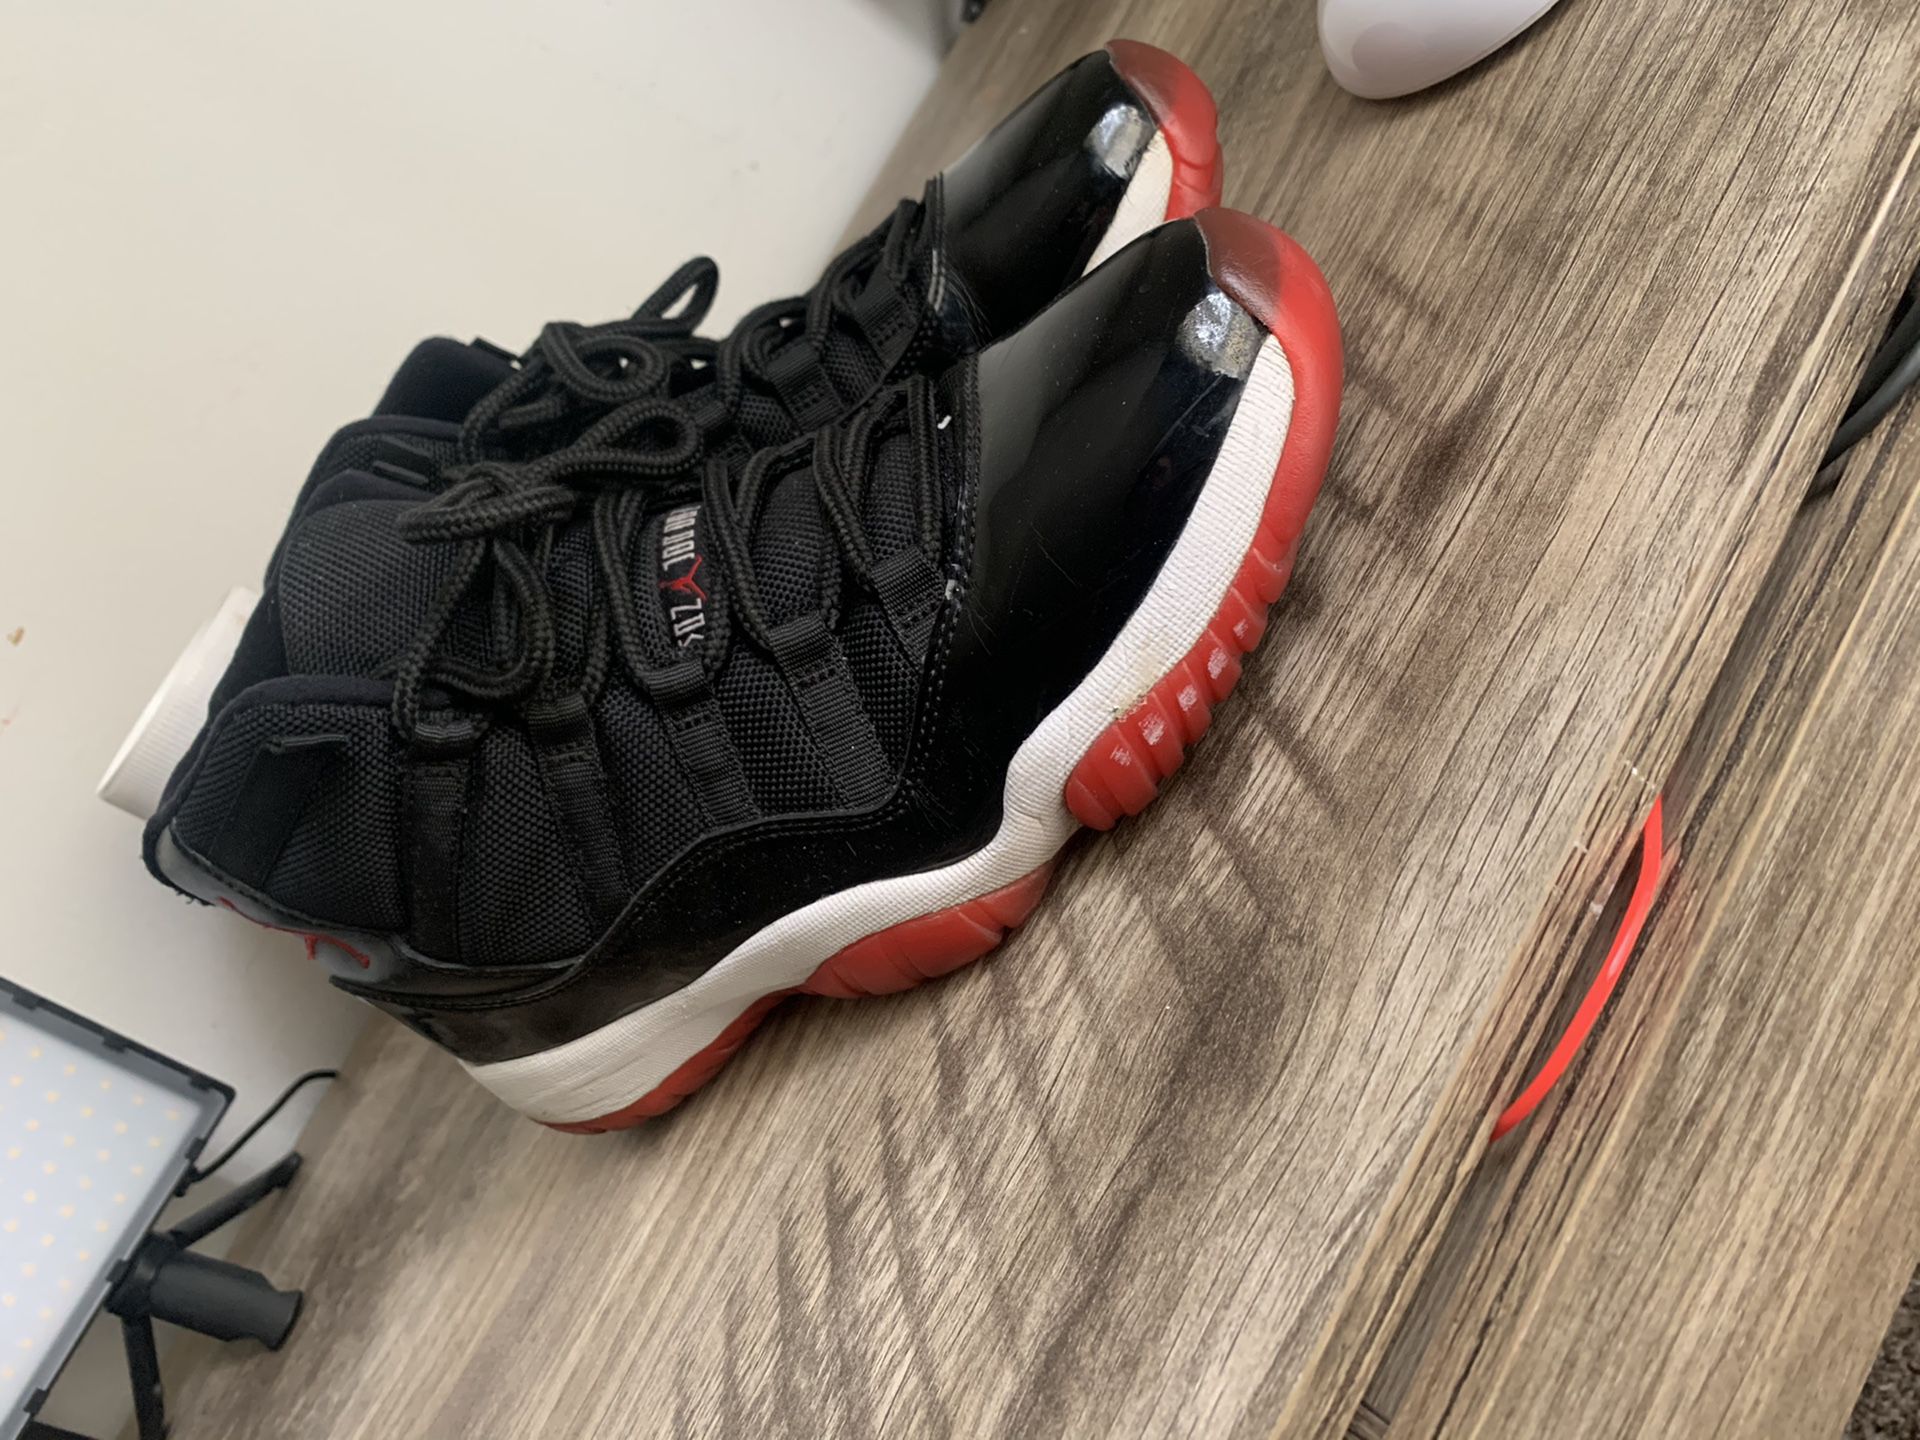 Jordan retro 11 ( not fake) I don't have the box size 9,5 good condition /they are sold together